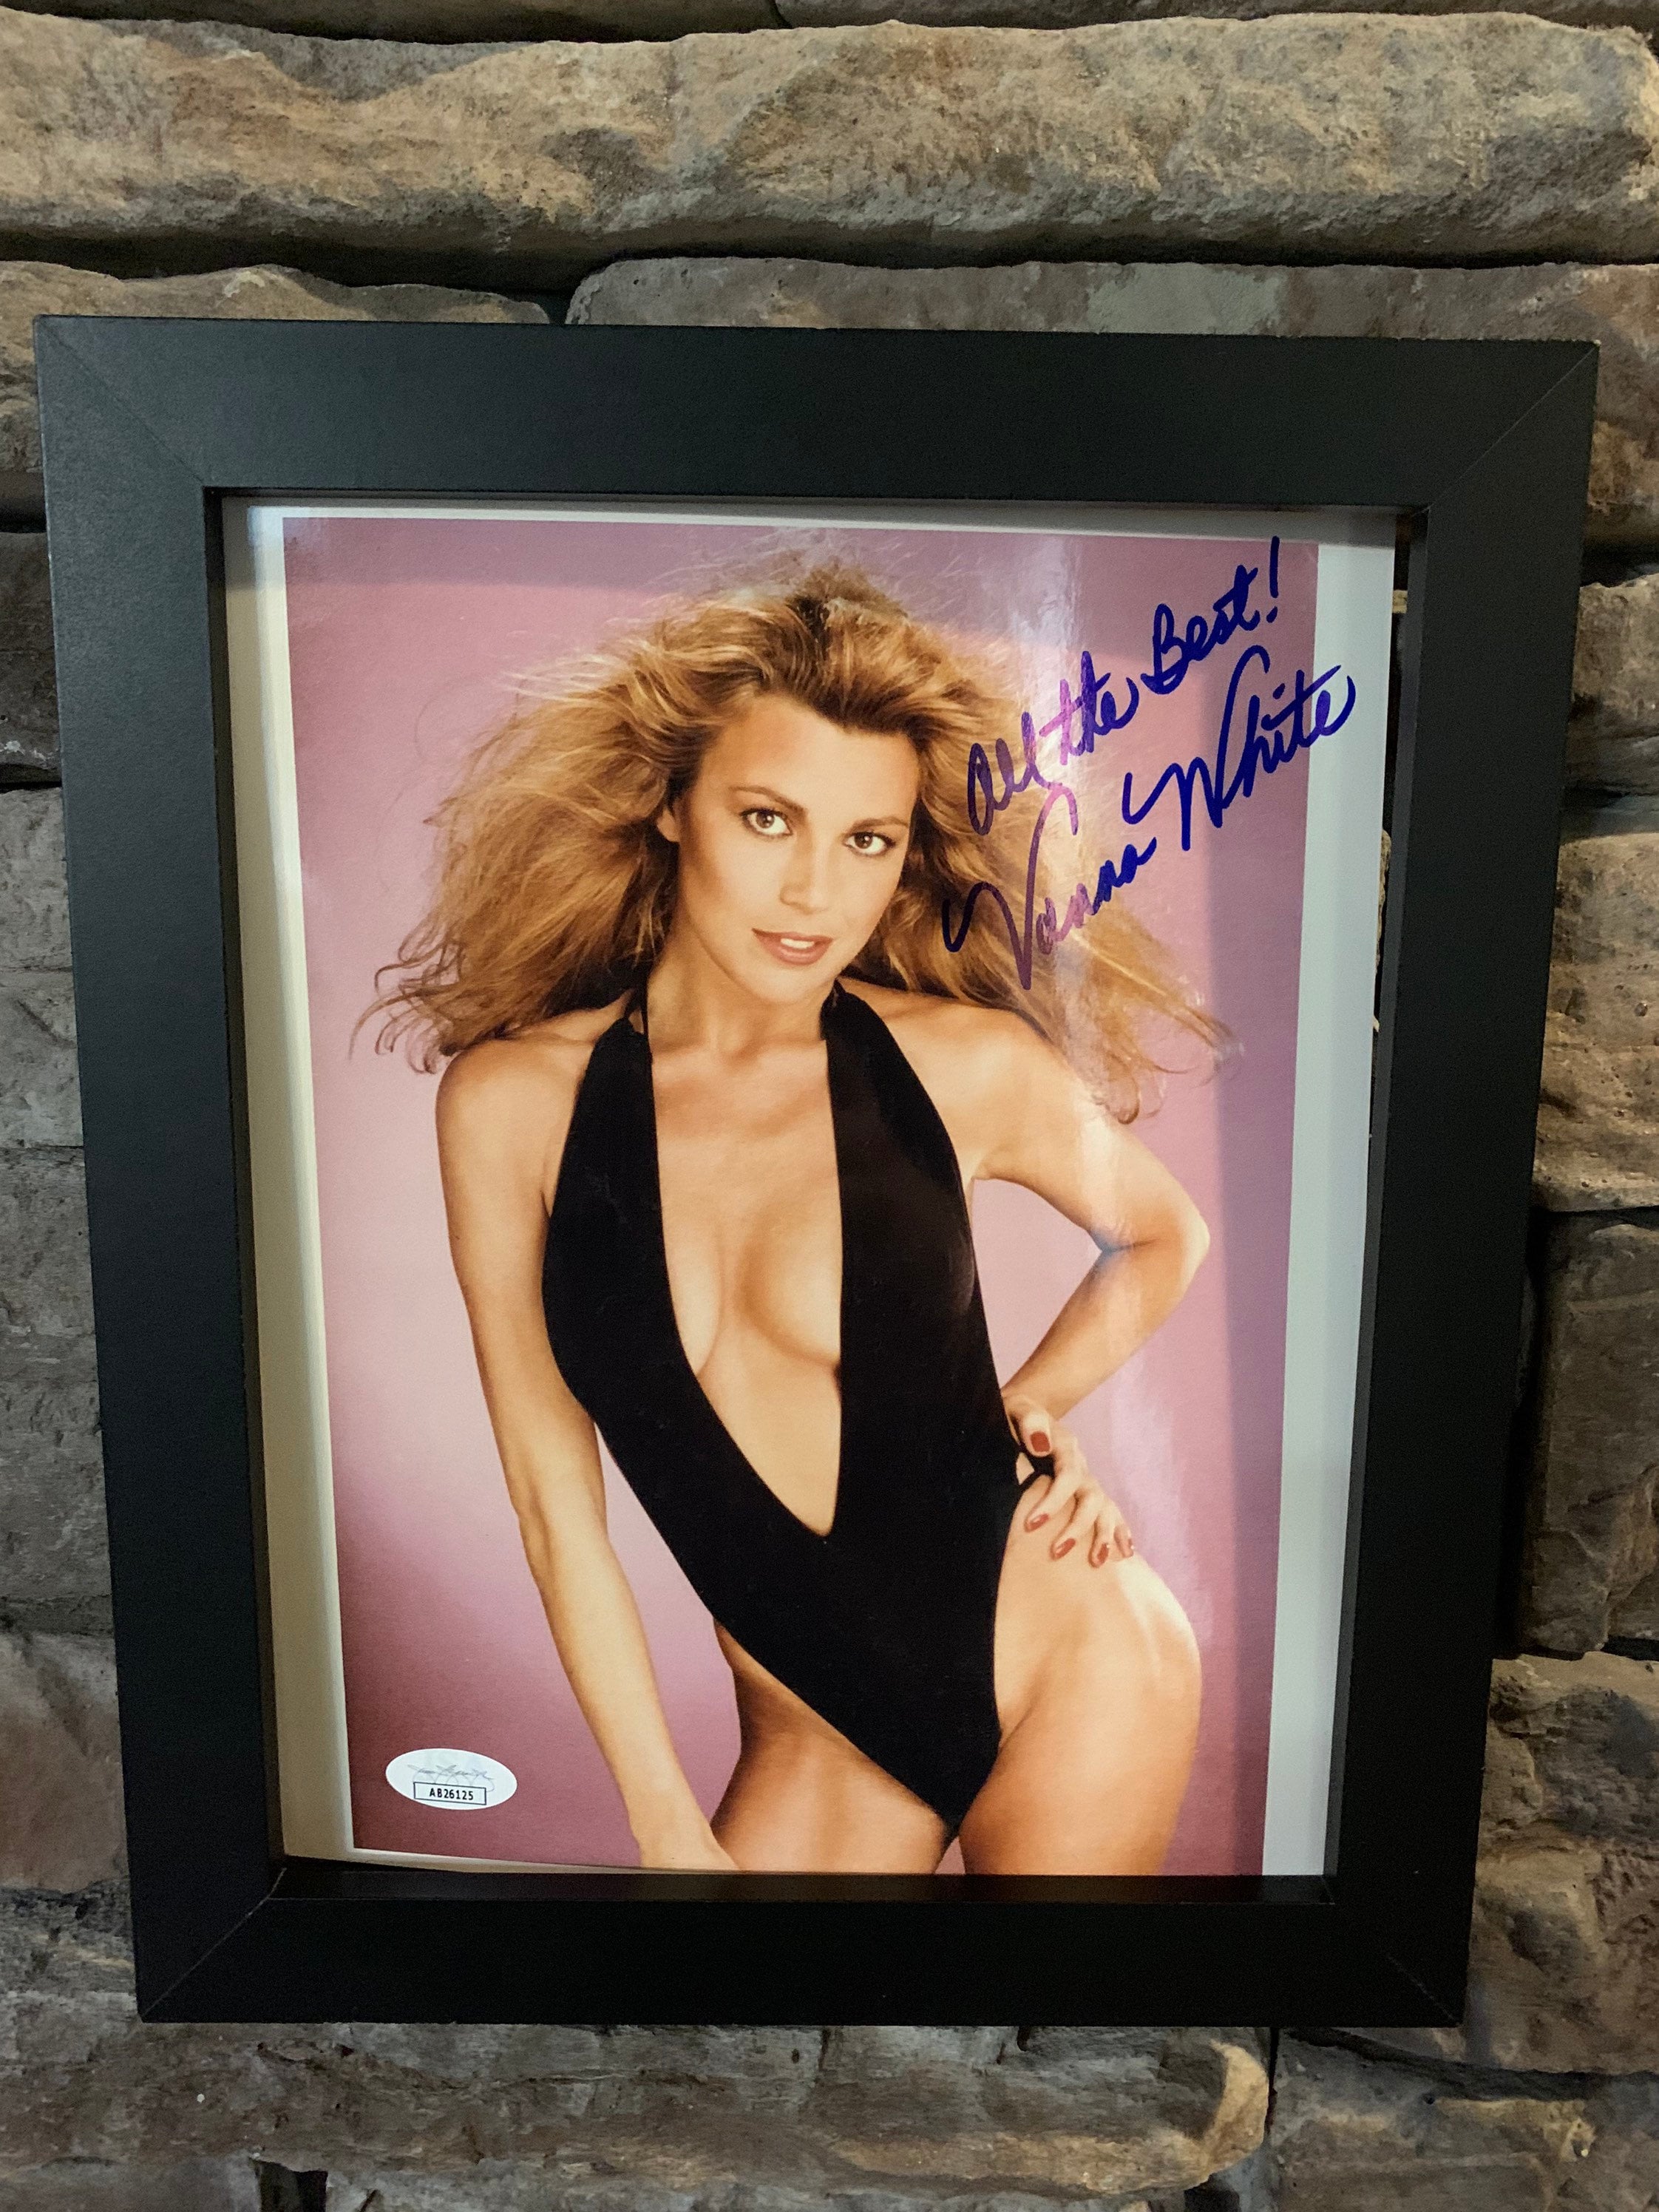 corrie sorensen recommends Vanna White And Playboy